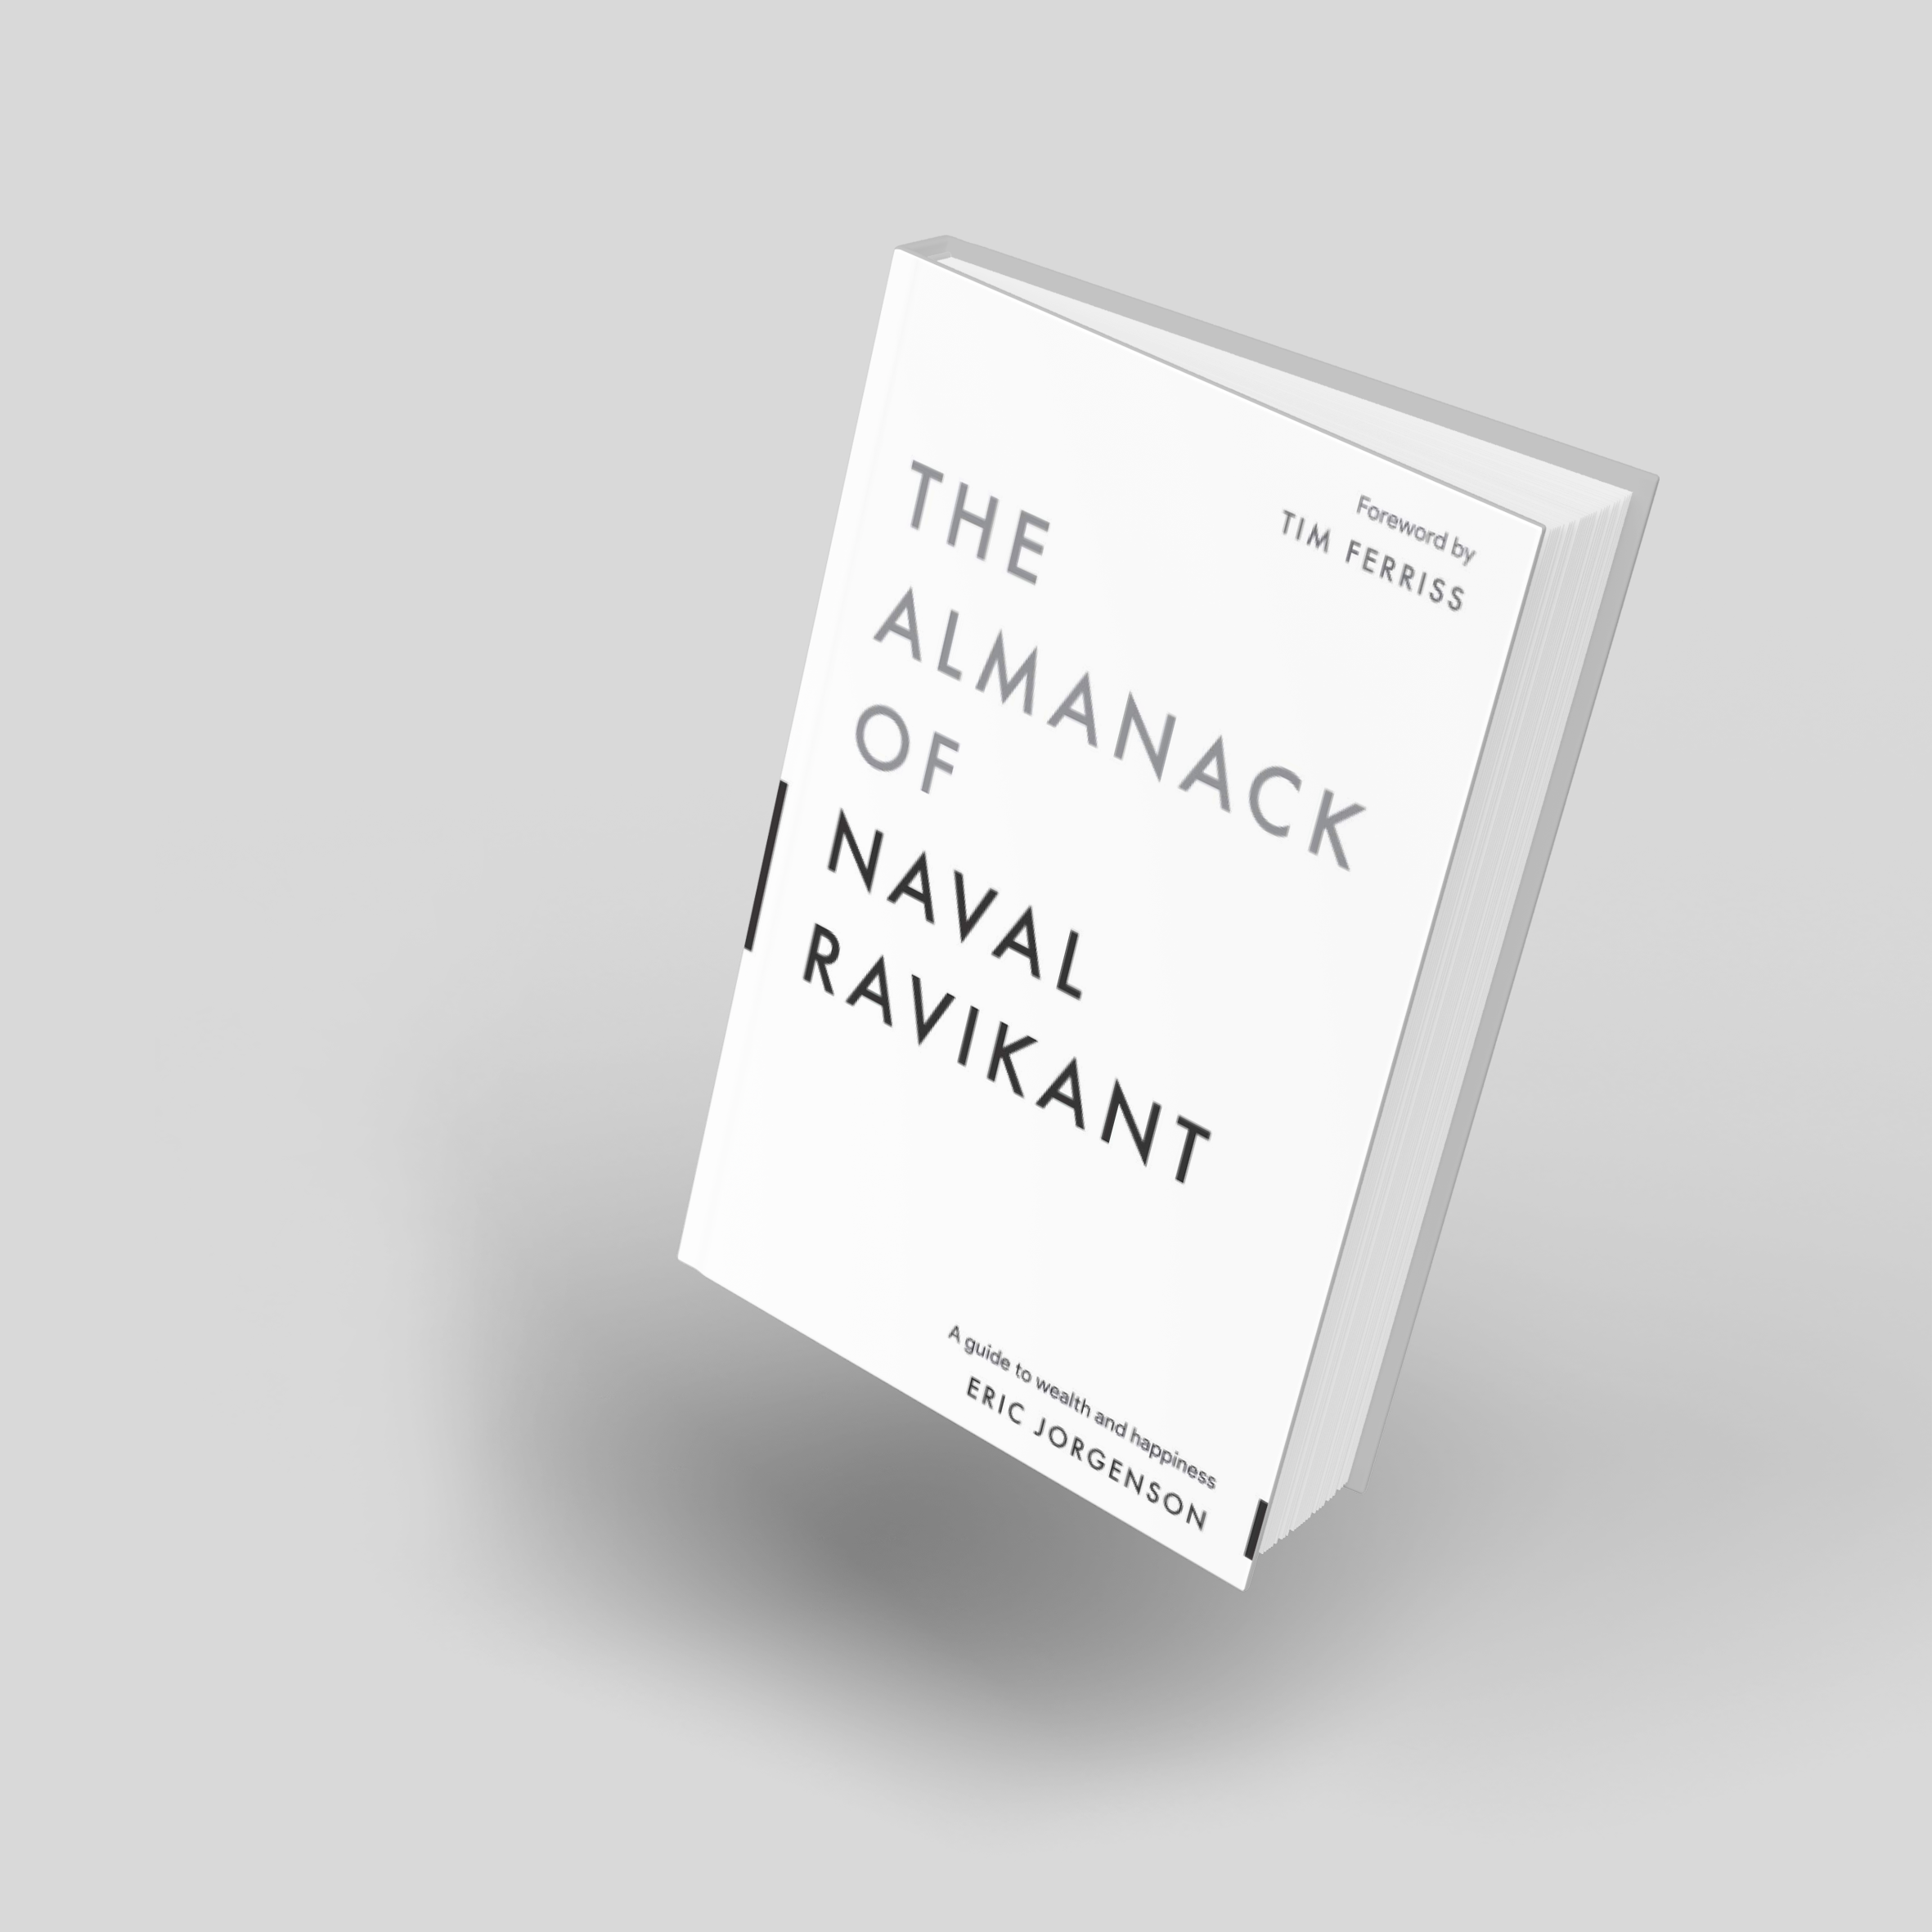 Book Club - The Almanack of Naval Ravikant - Tramondo Investment Partners AG